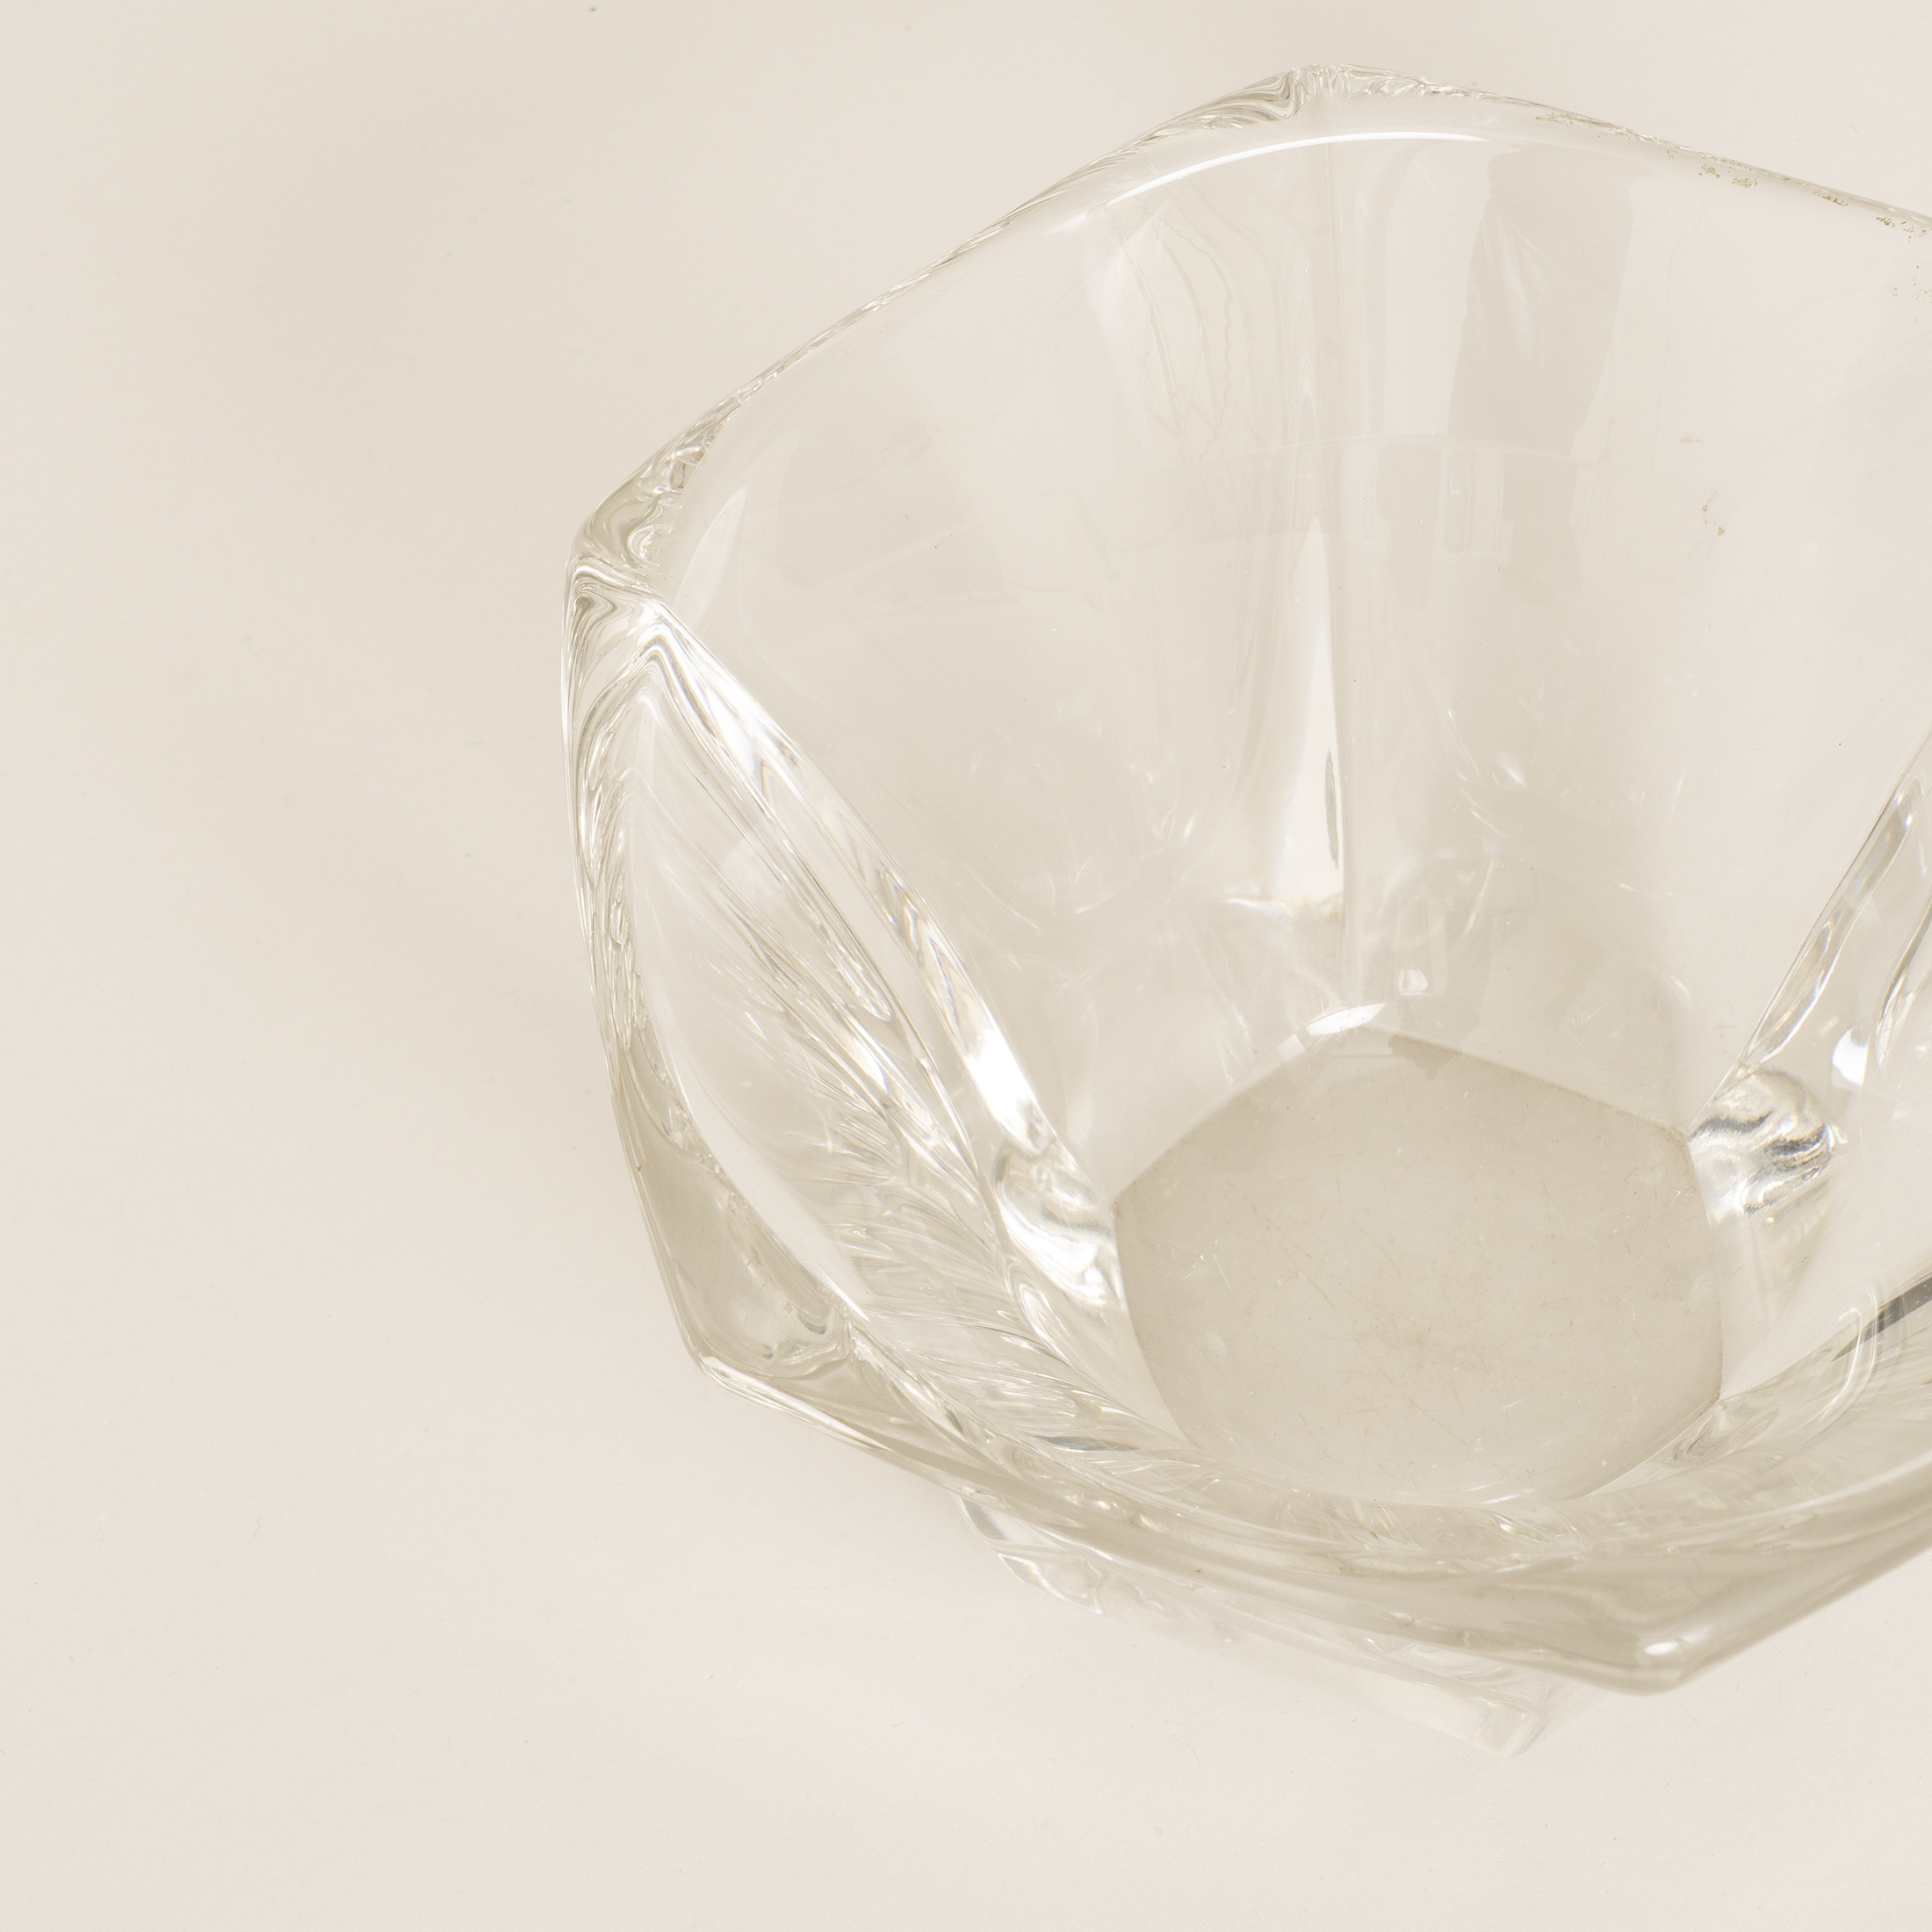 The image for Scandinavian Wide Glass Vase 0311